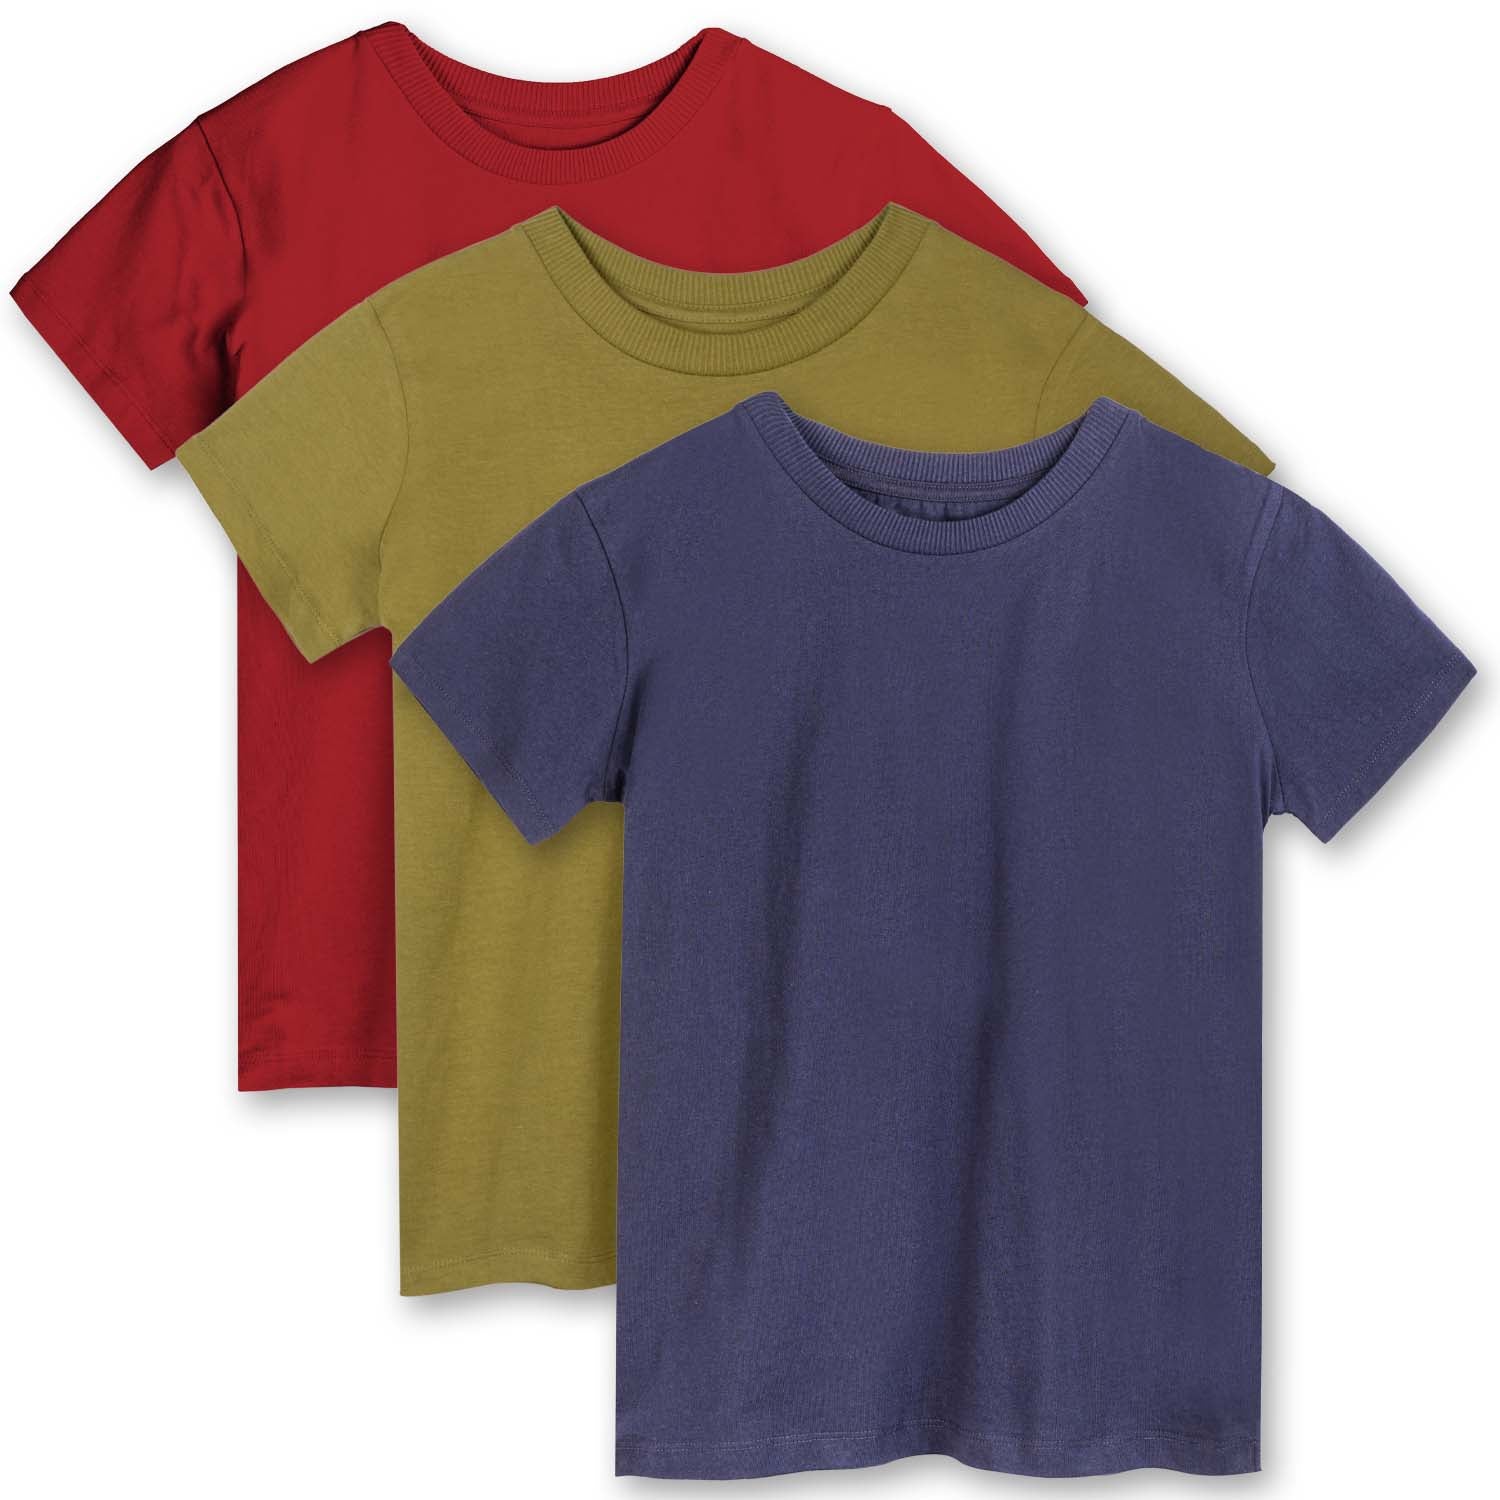 3 - Mightly Pack T-Shirts - Extended Organic Kids Shirts Length Cotton